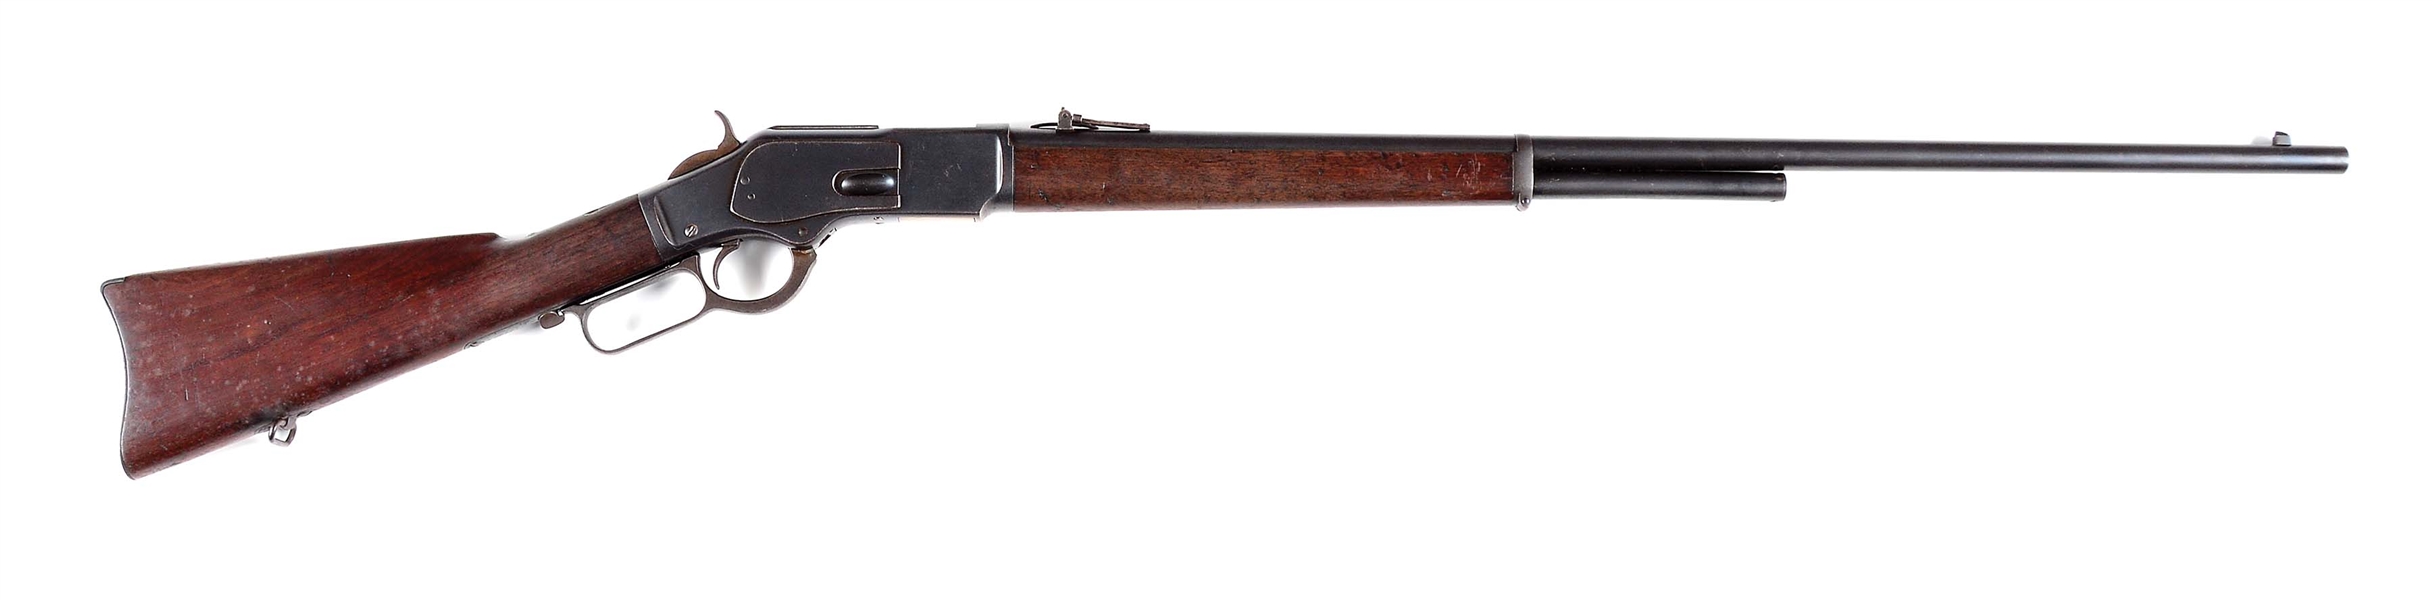 (A) WINCHESTER 1873 .44-40 LEVER ACTION RIFLED MUSKET.